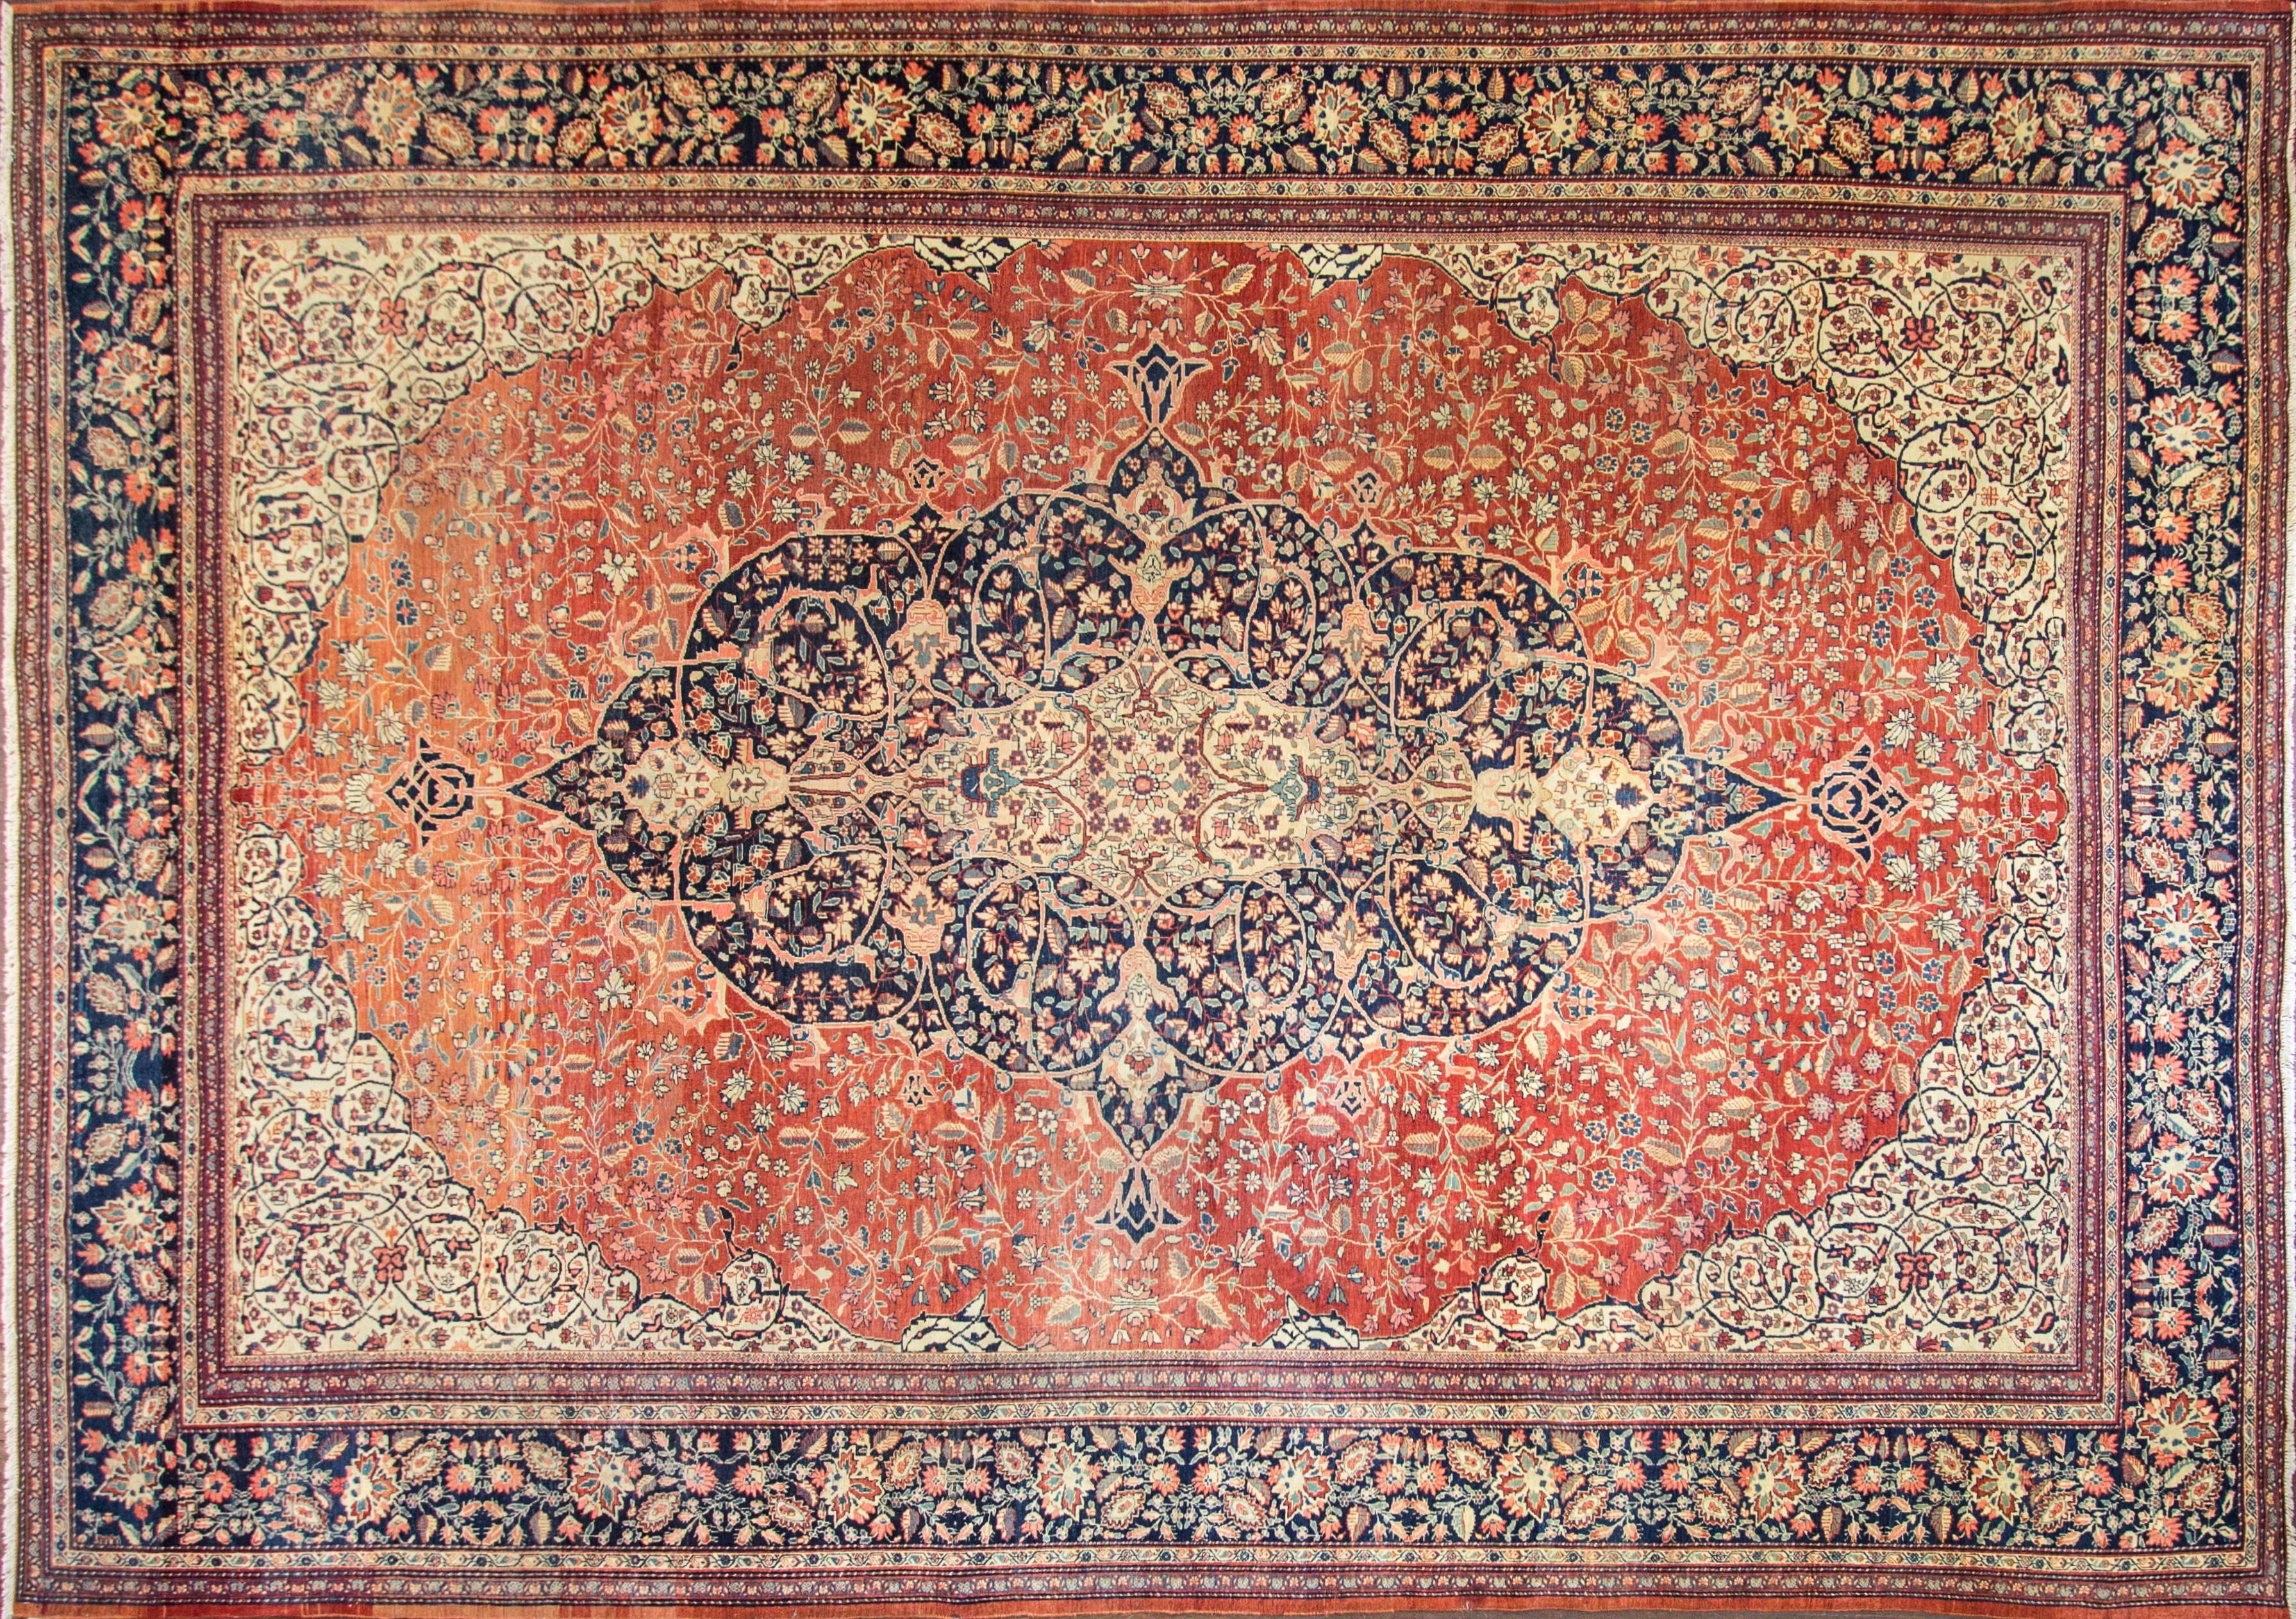 Feraghans were made between the 1870s and 1913 from a region north of the town of Arak, produced for the Persian aristocracy. They are single wefted, long and narrow or room-sized carpets, typically with an all-over Herati design or floral and